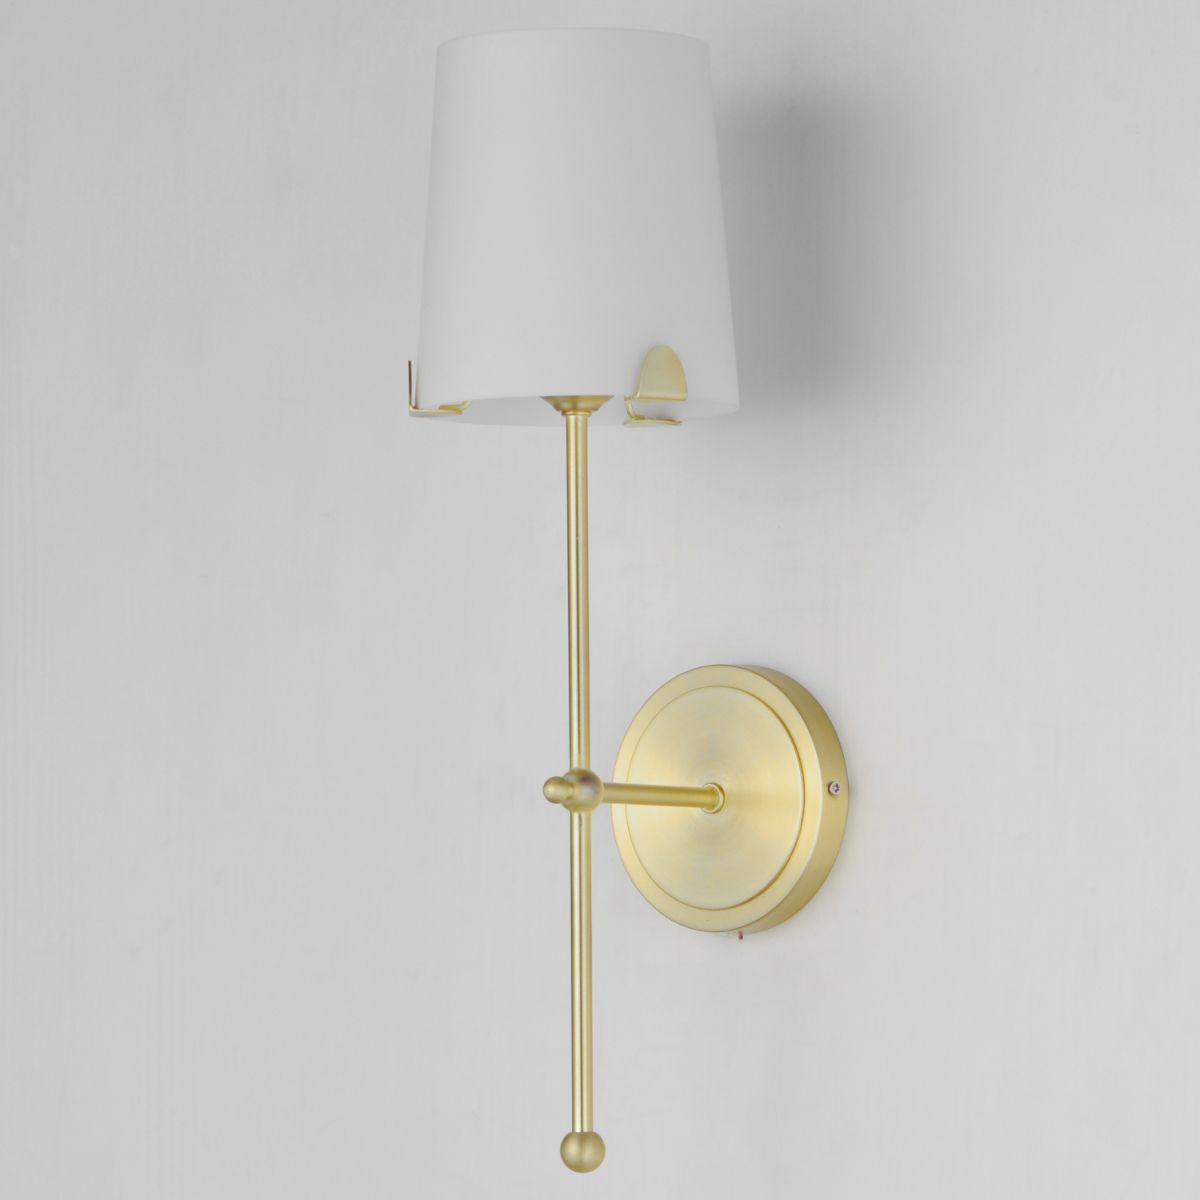 Huntington 20 in. Armed Sconce